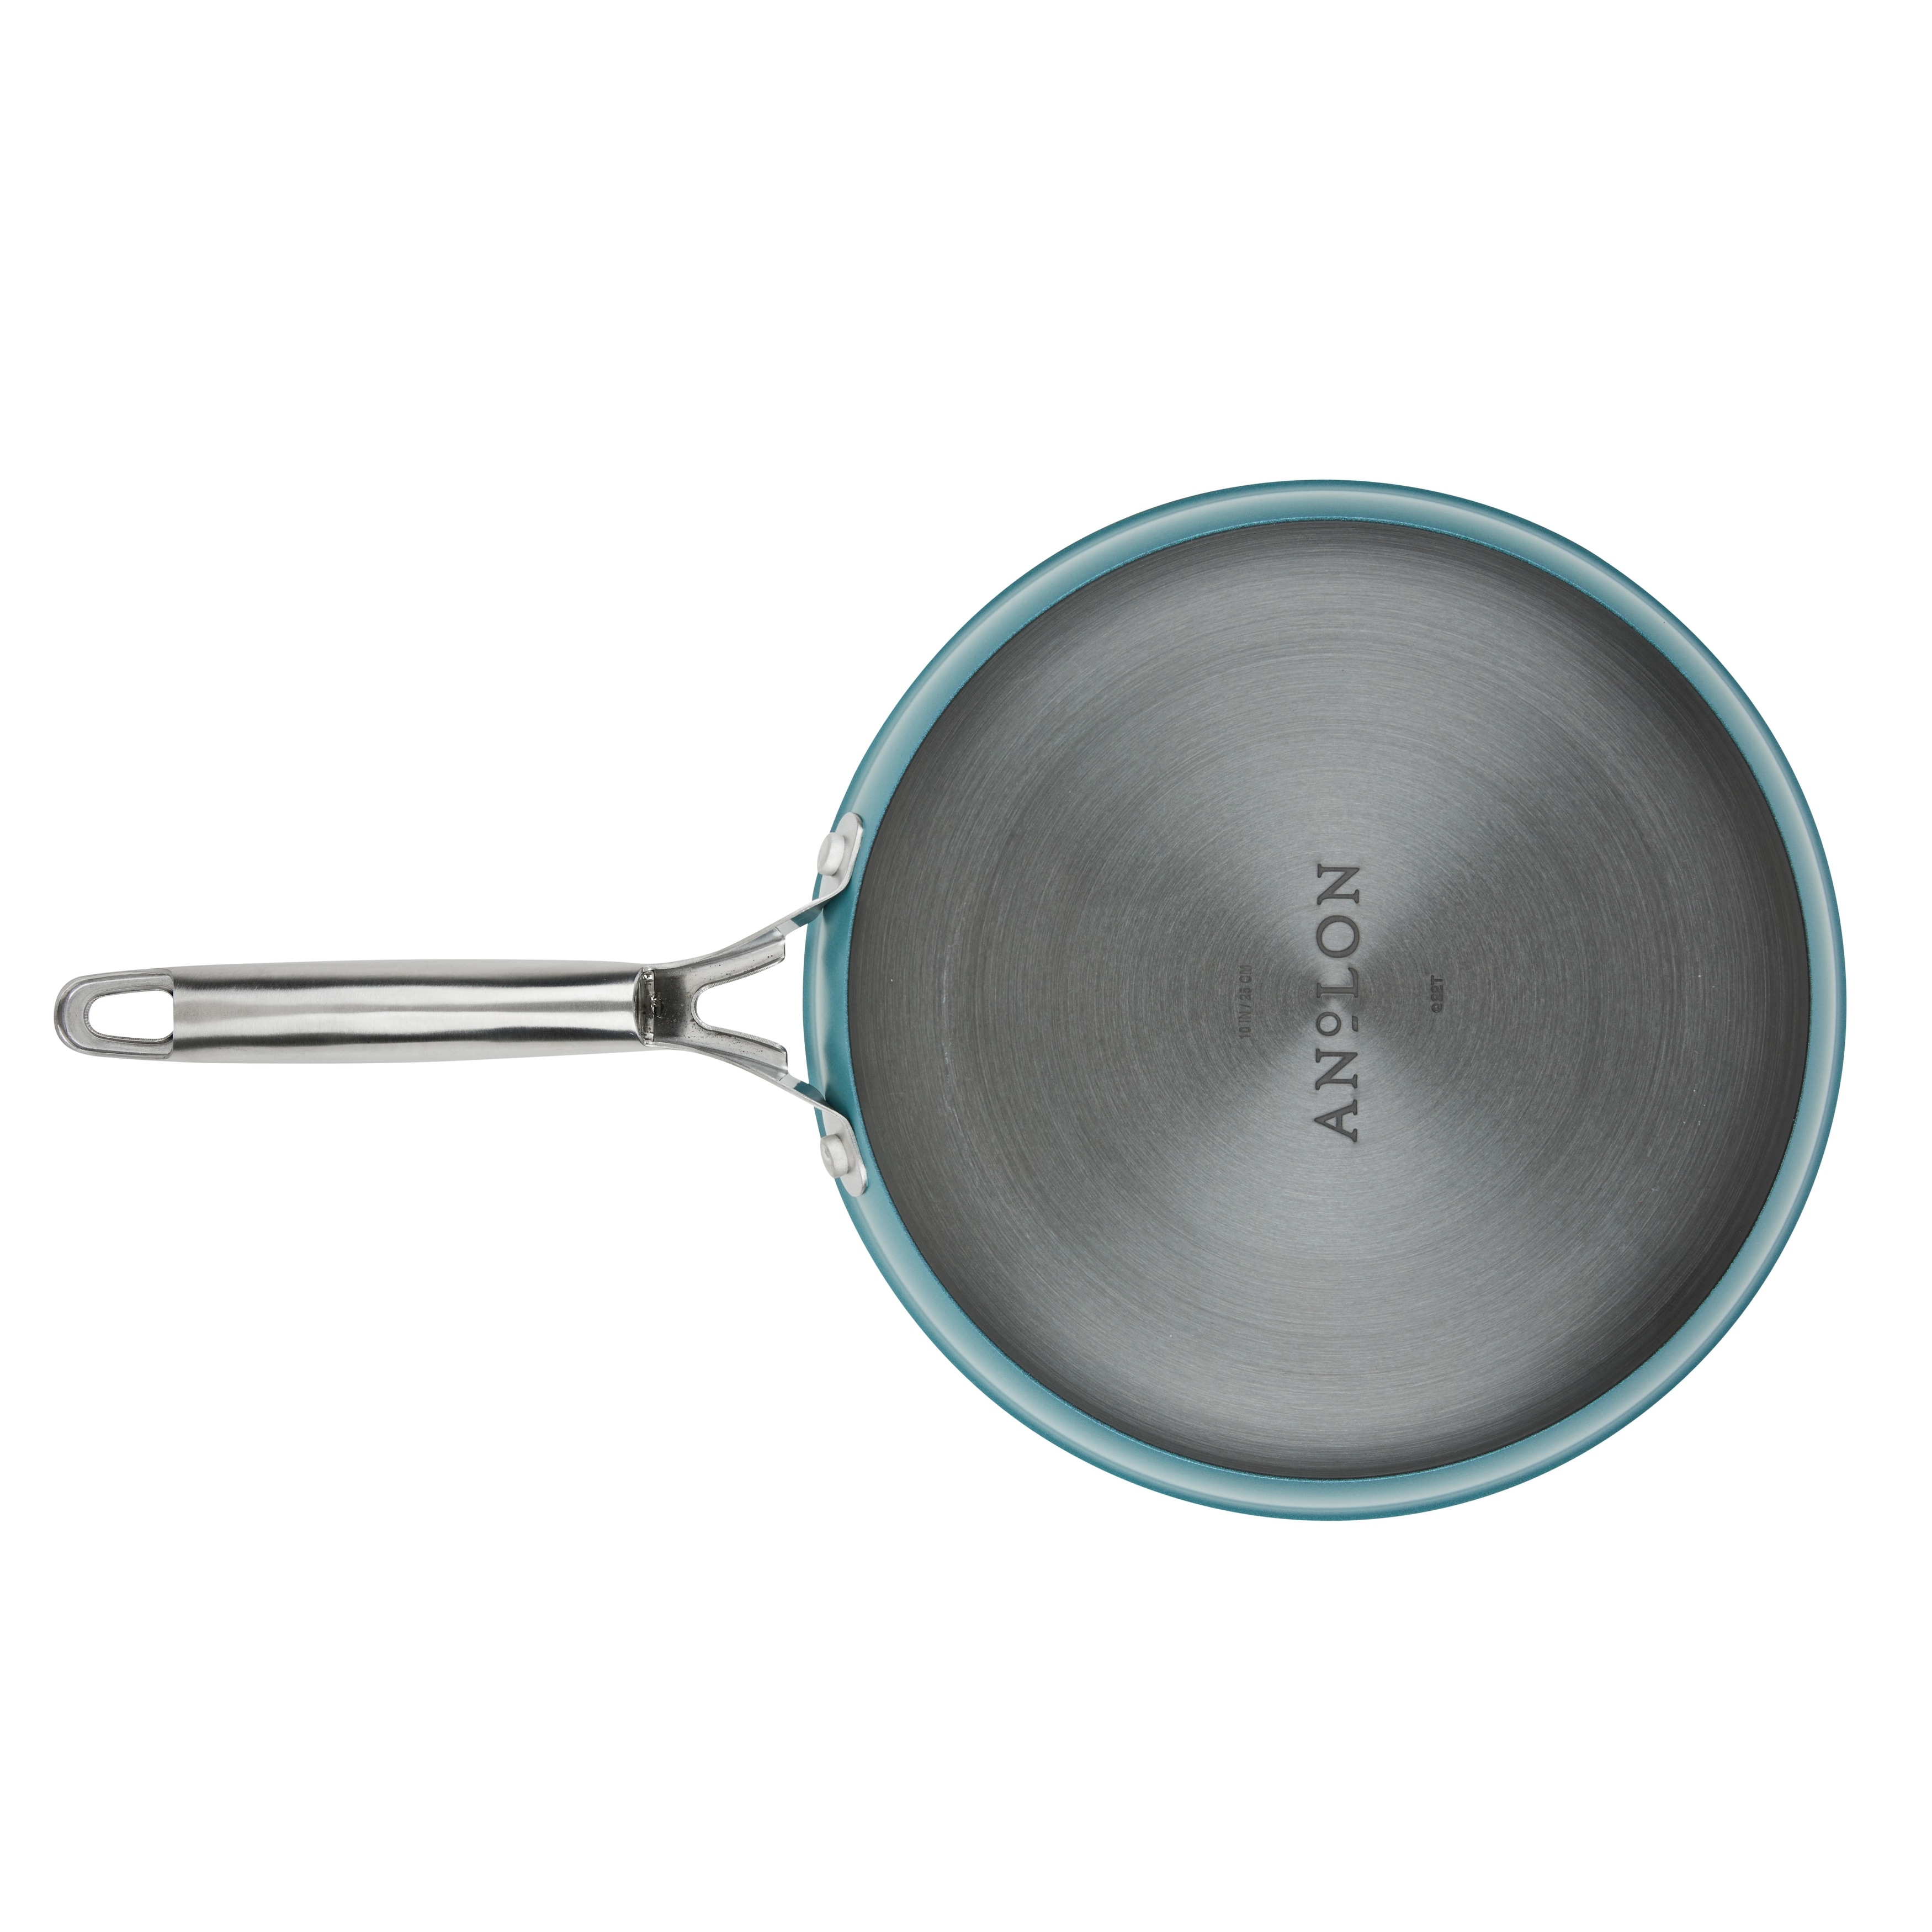 https://ak1.ostkcdn.com/images/products/is/images/direct/317a3bbbcfcbdaaefbbb687dc9a64ec27cd040f2/Anolon-Achieve-Hard-Anodized-Nonstick-Frying-Pan%2C-12-Inch.jpg